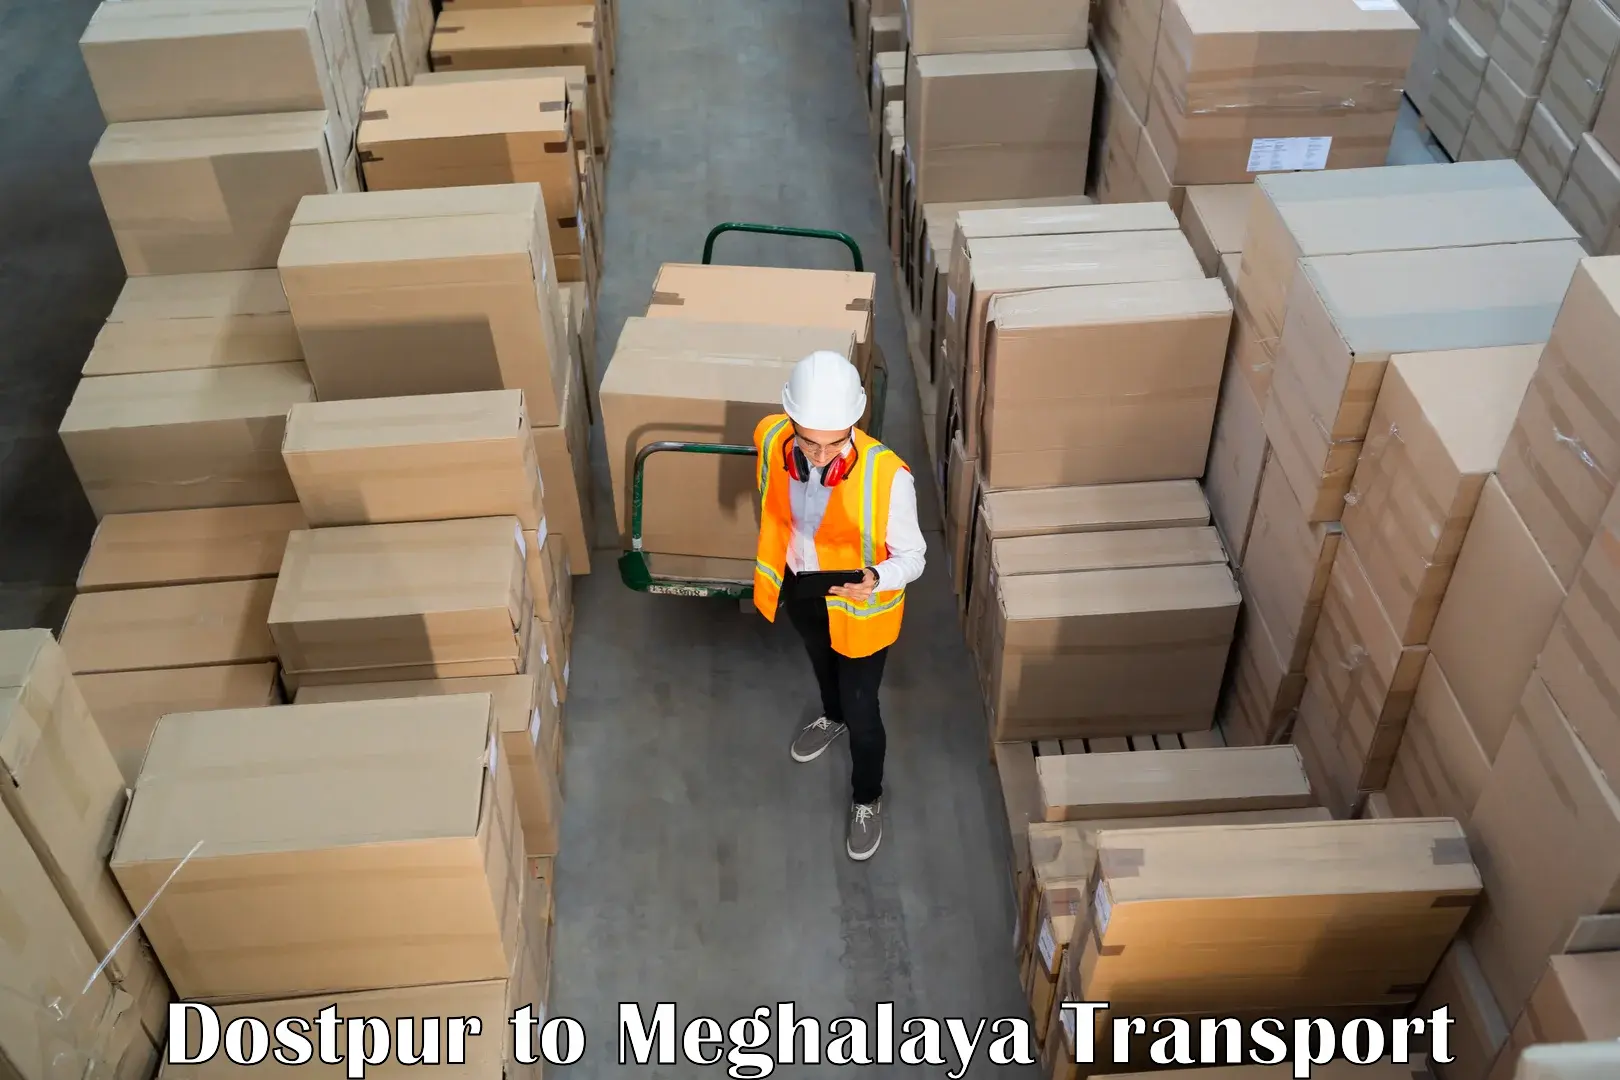 Truck transport companies in India in Dostpur to Meghalaya